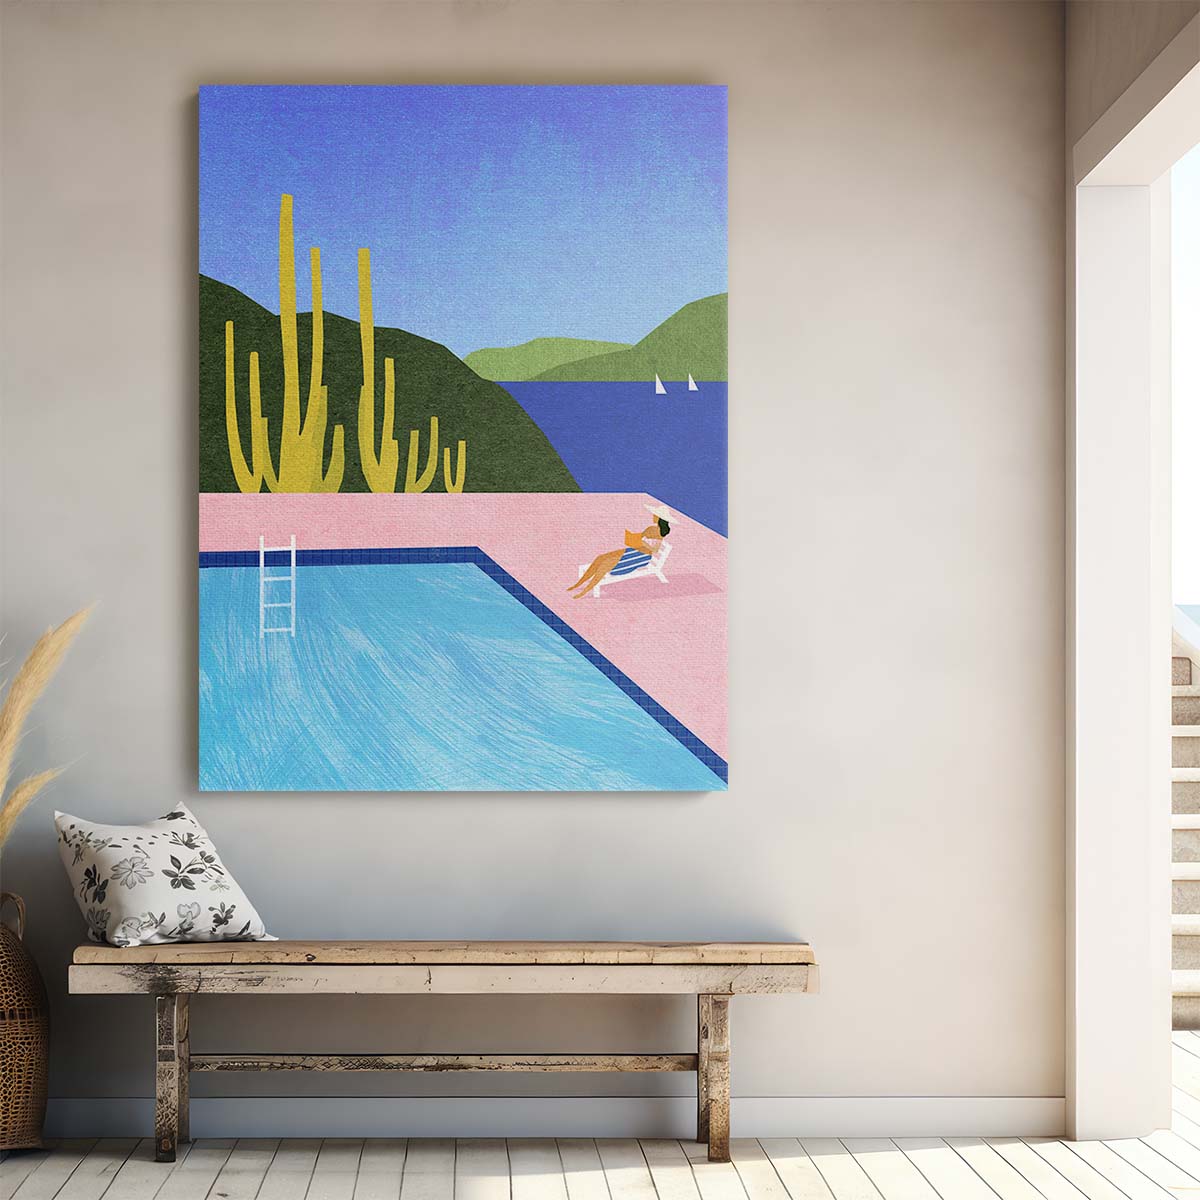 Ibiza Vacation Illustration Woman Chilling in Colorful Pool Landscape by Luxuriance Designs, made in USA